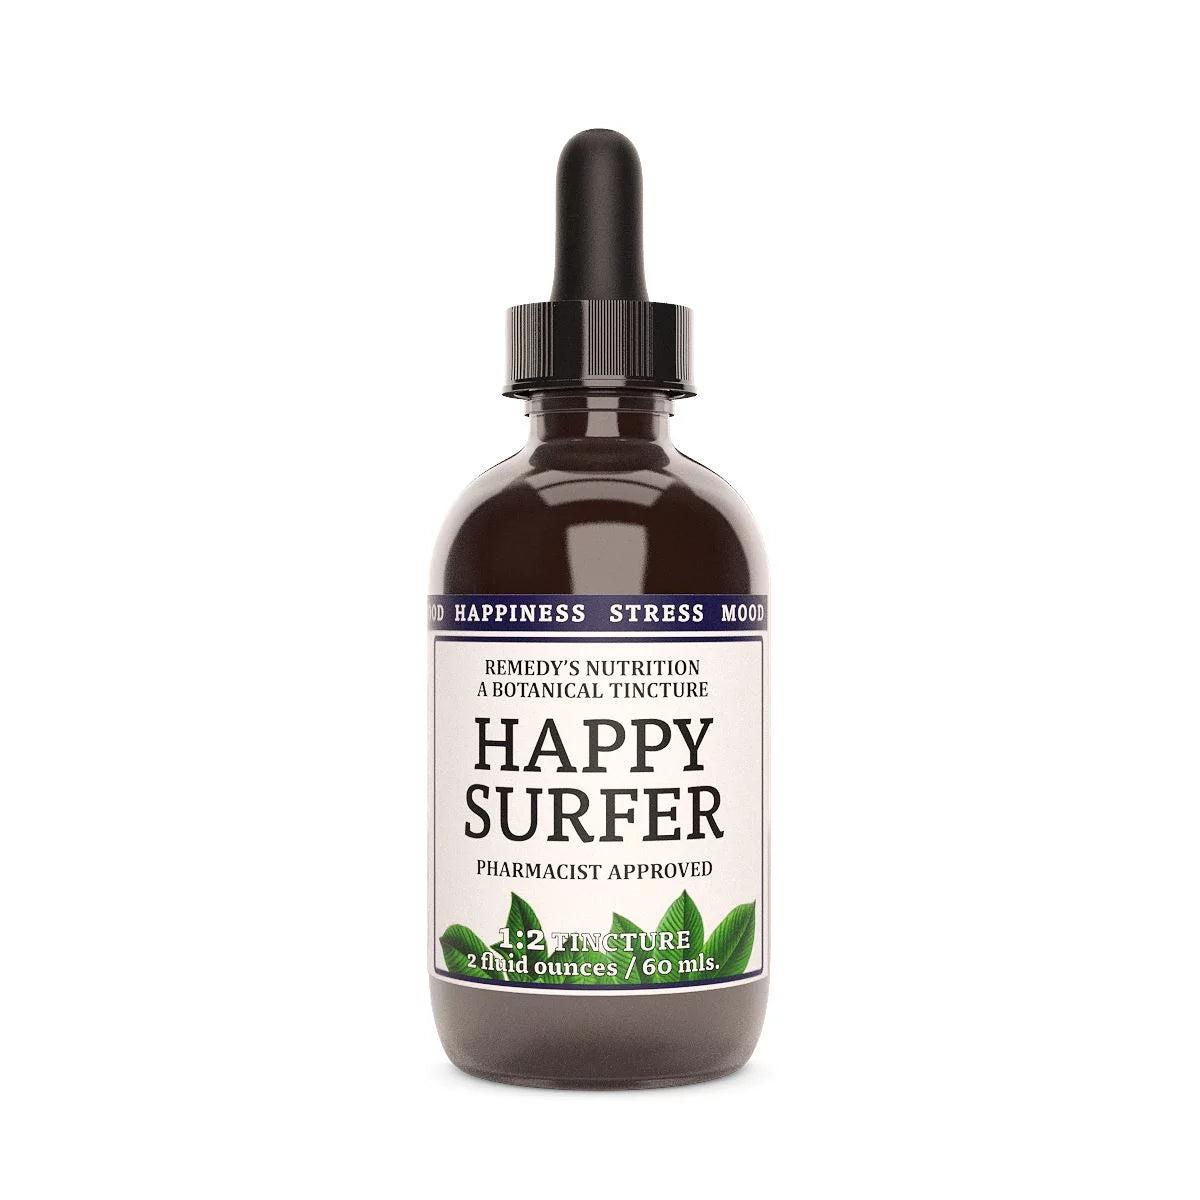 Image of Remedy's Nutrition® Happy Surfer™ Tincture Dietary Herbal Supplement front bottle. Made in the USA.